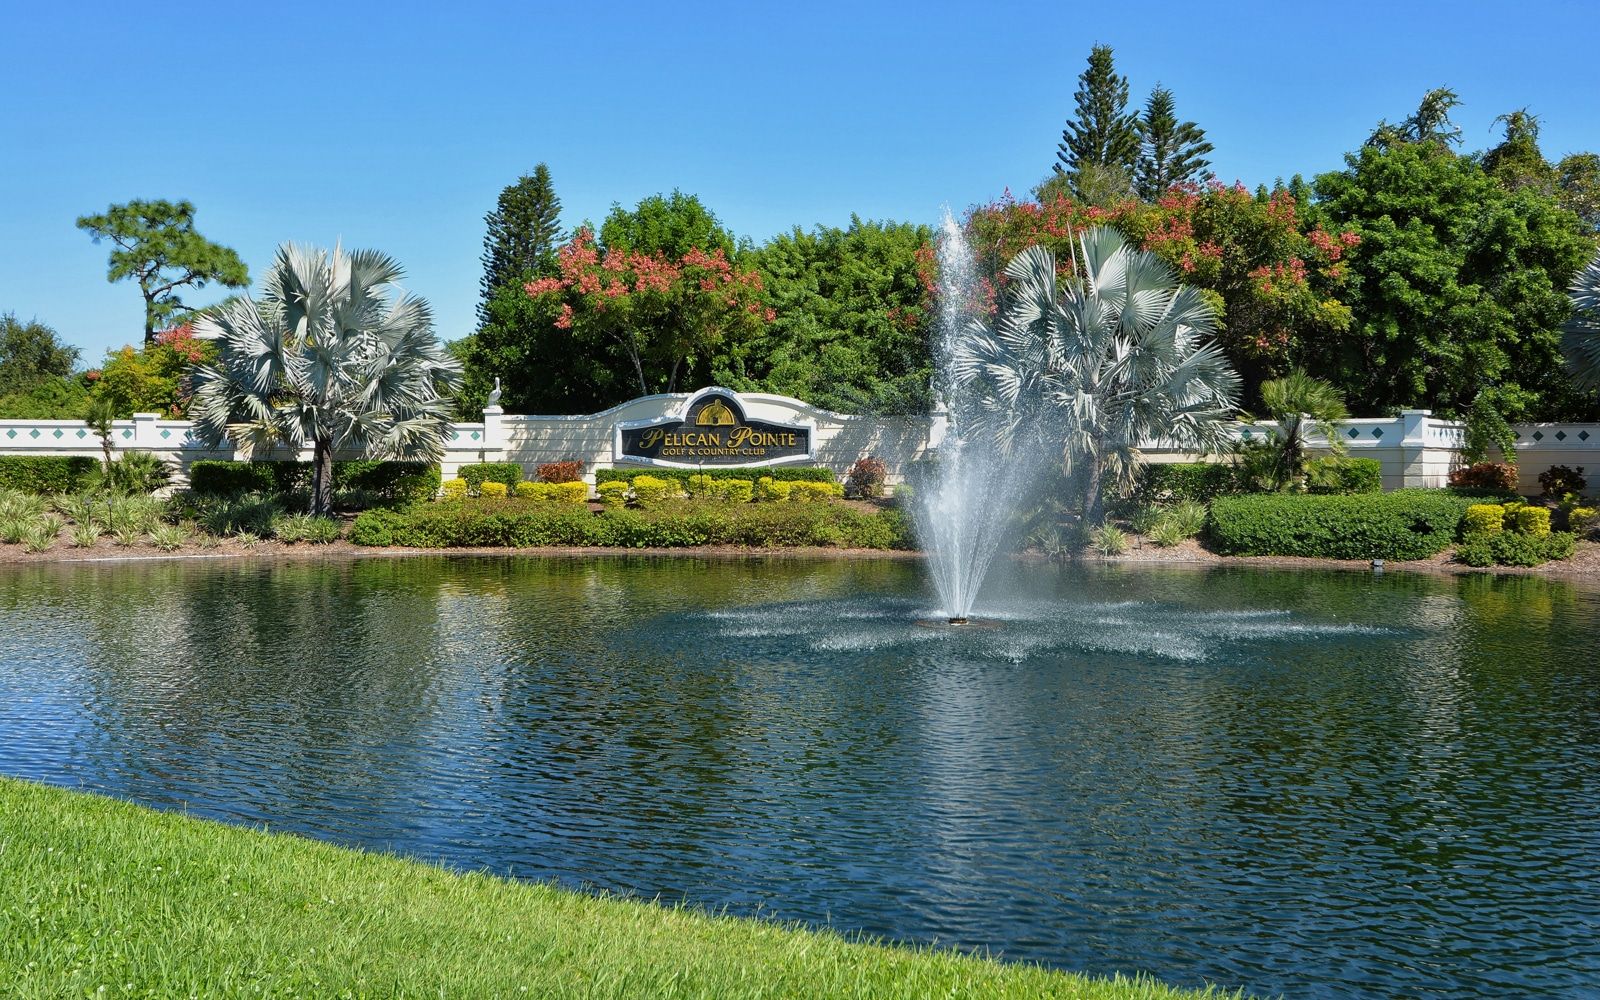 There is a lake with a fountain on the golf course